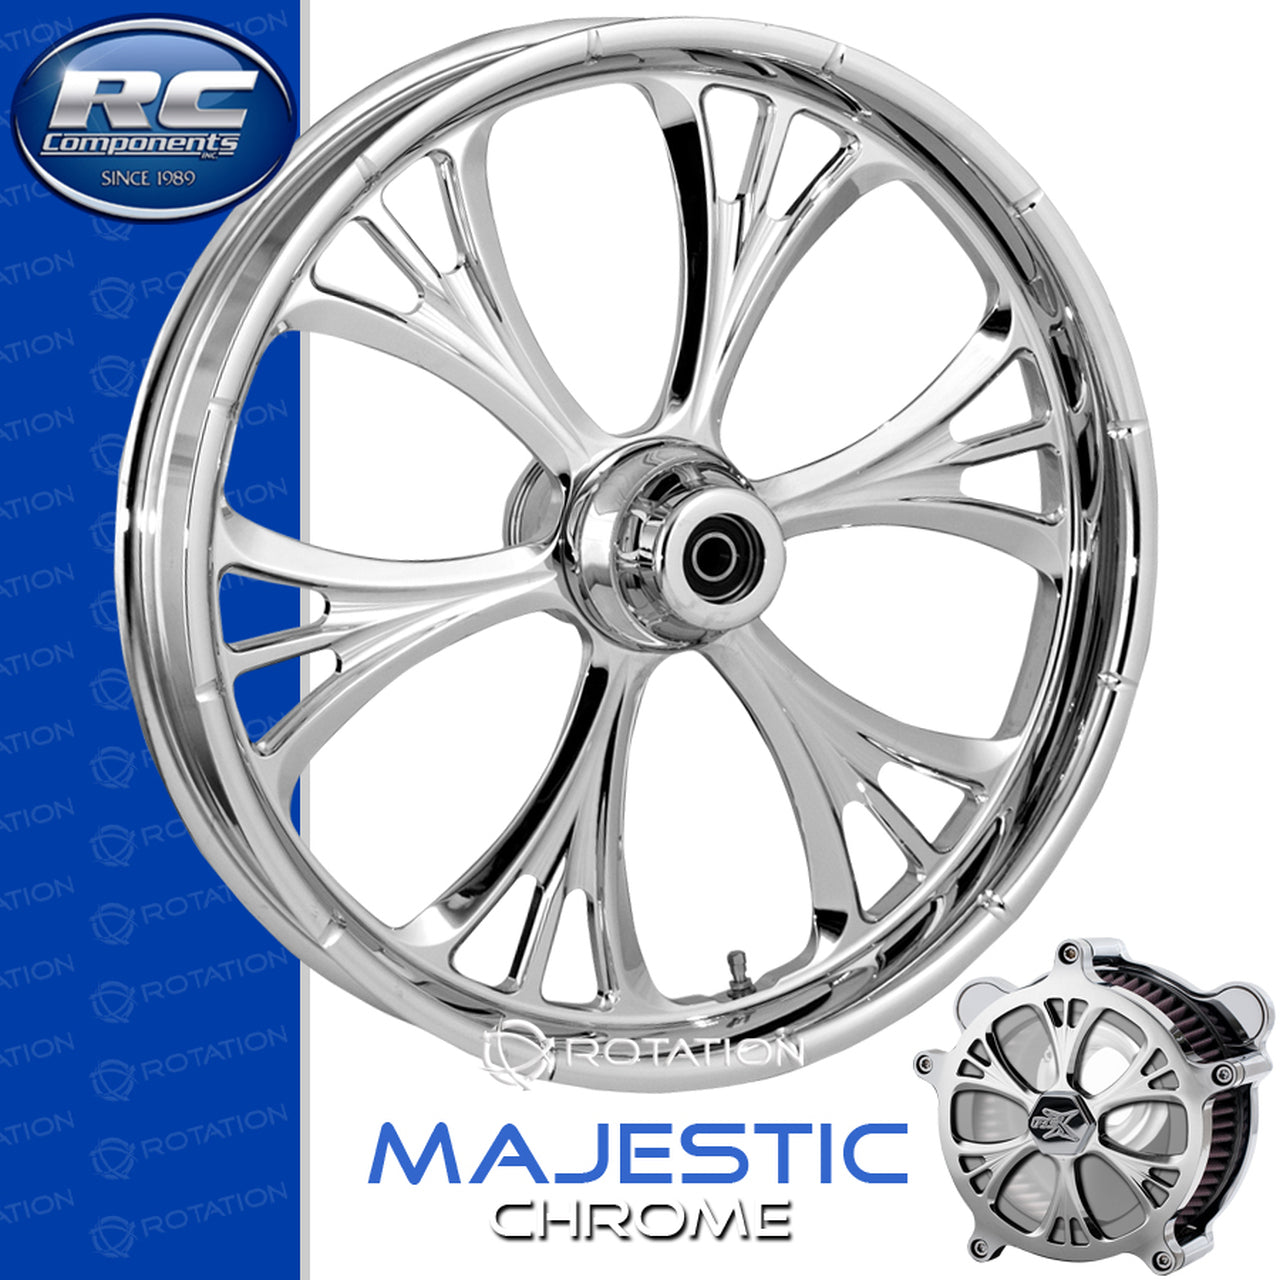 RC Components Majestic Chrome Touring Wheel